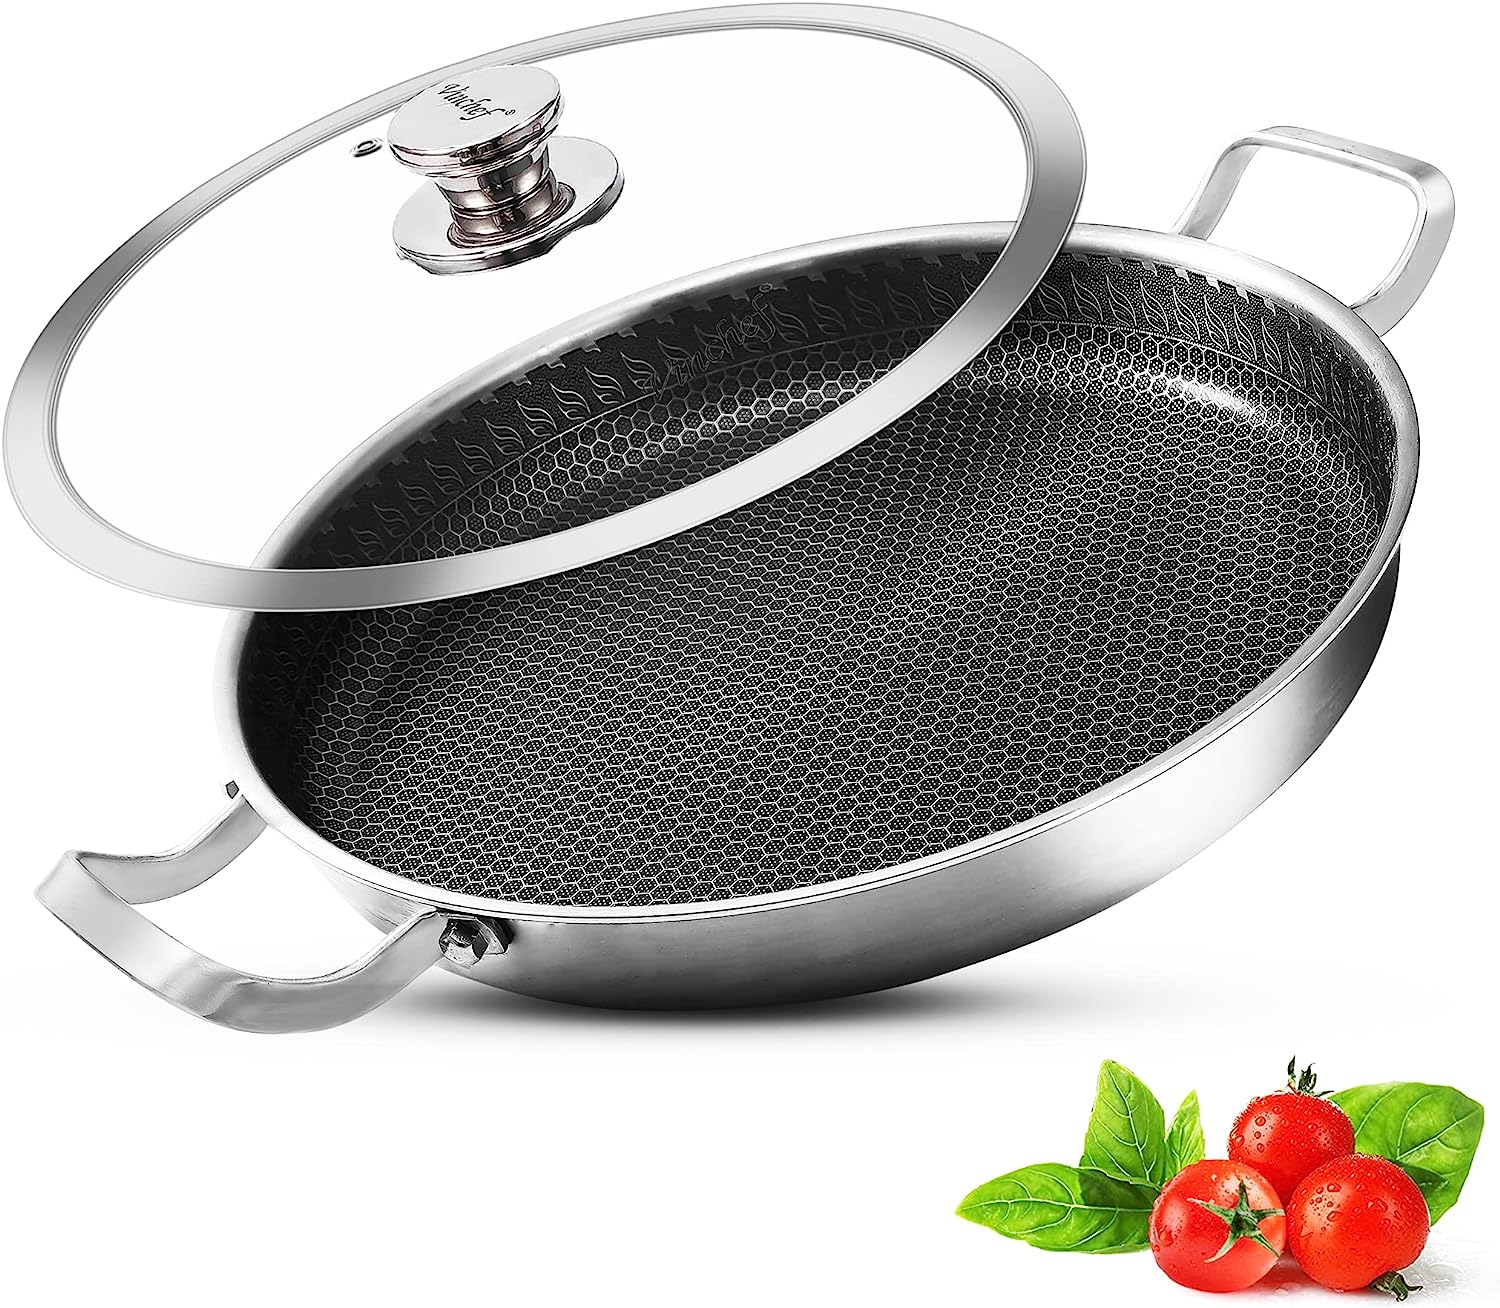 Vinchef Non Stick Frying Pans with Cooking Lid, 13” [...]